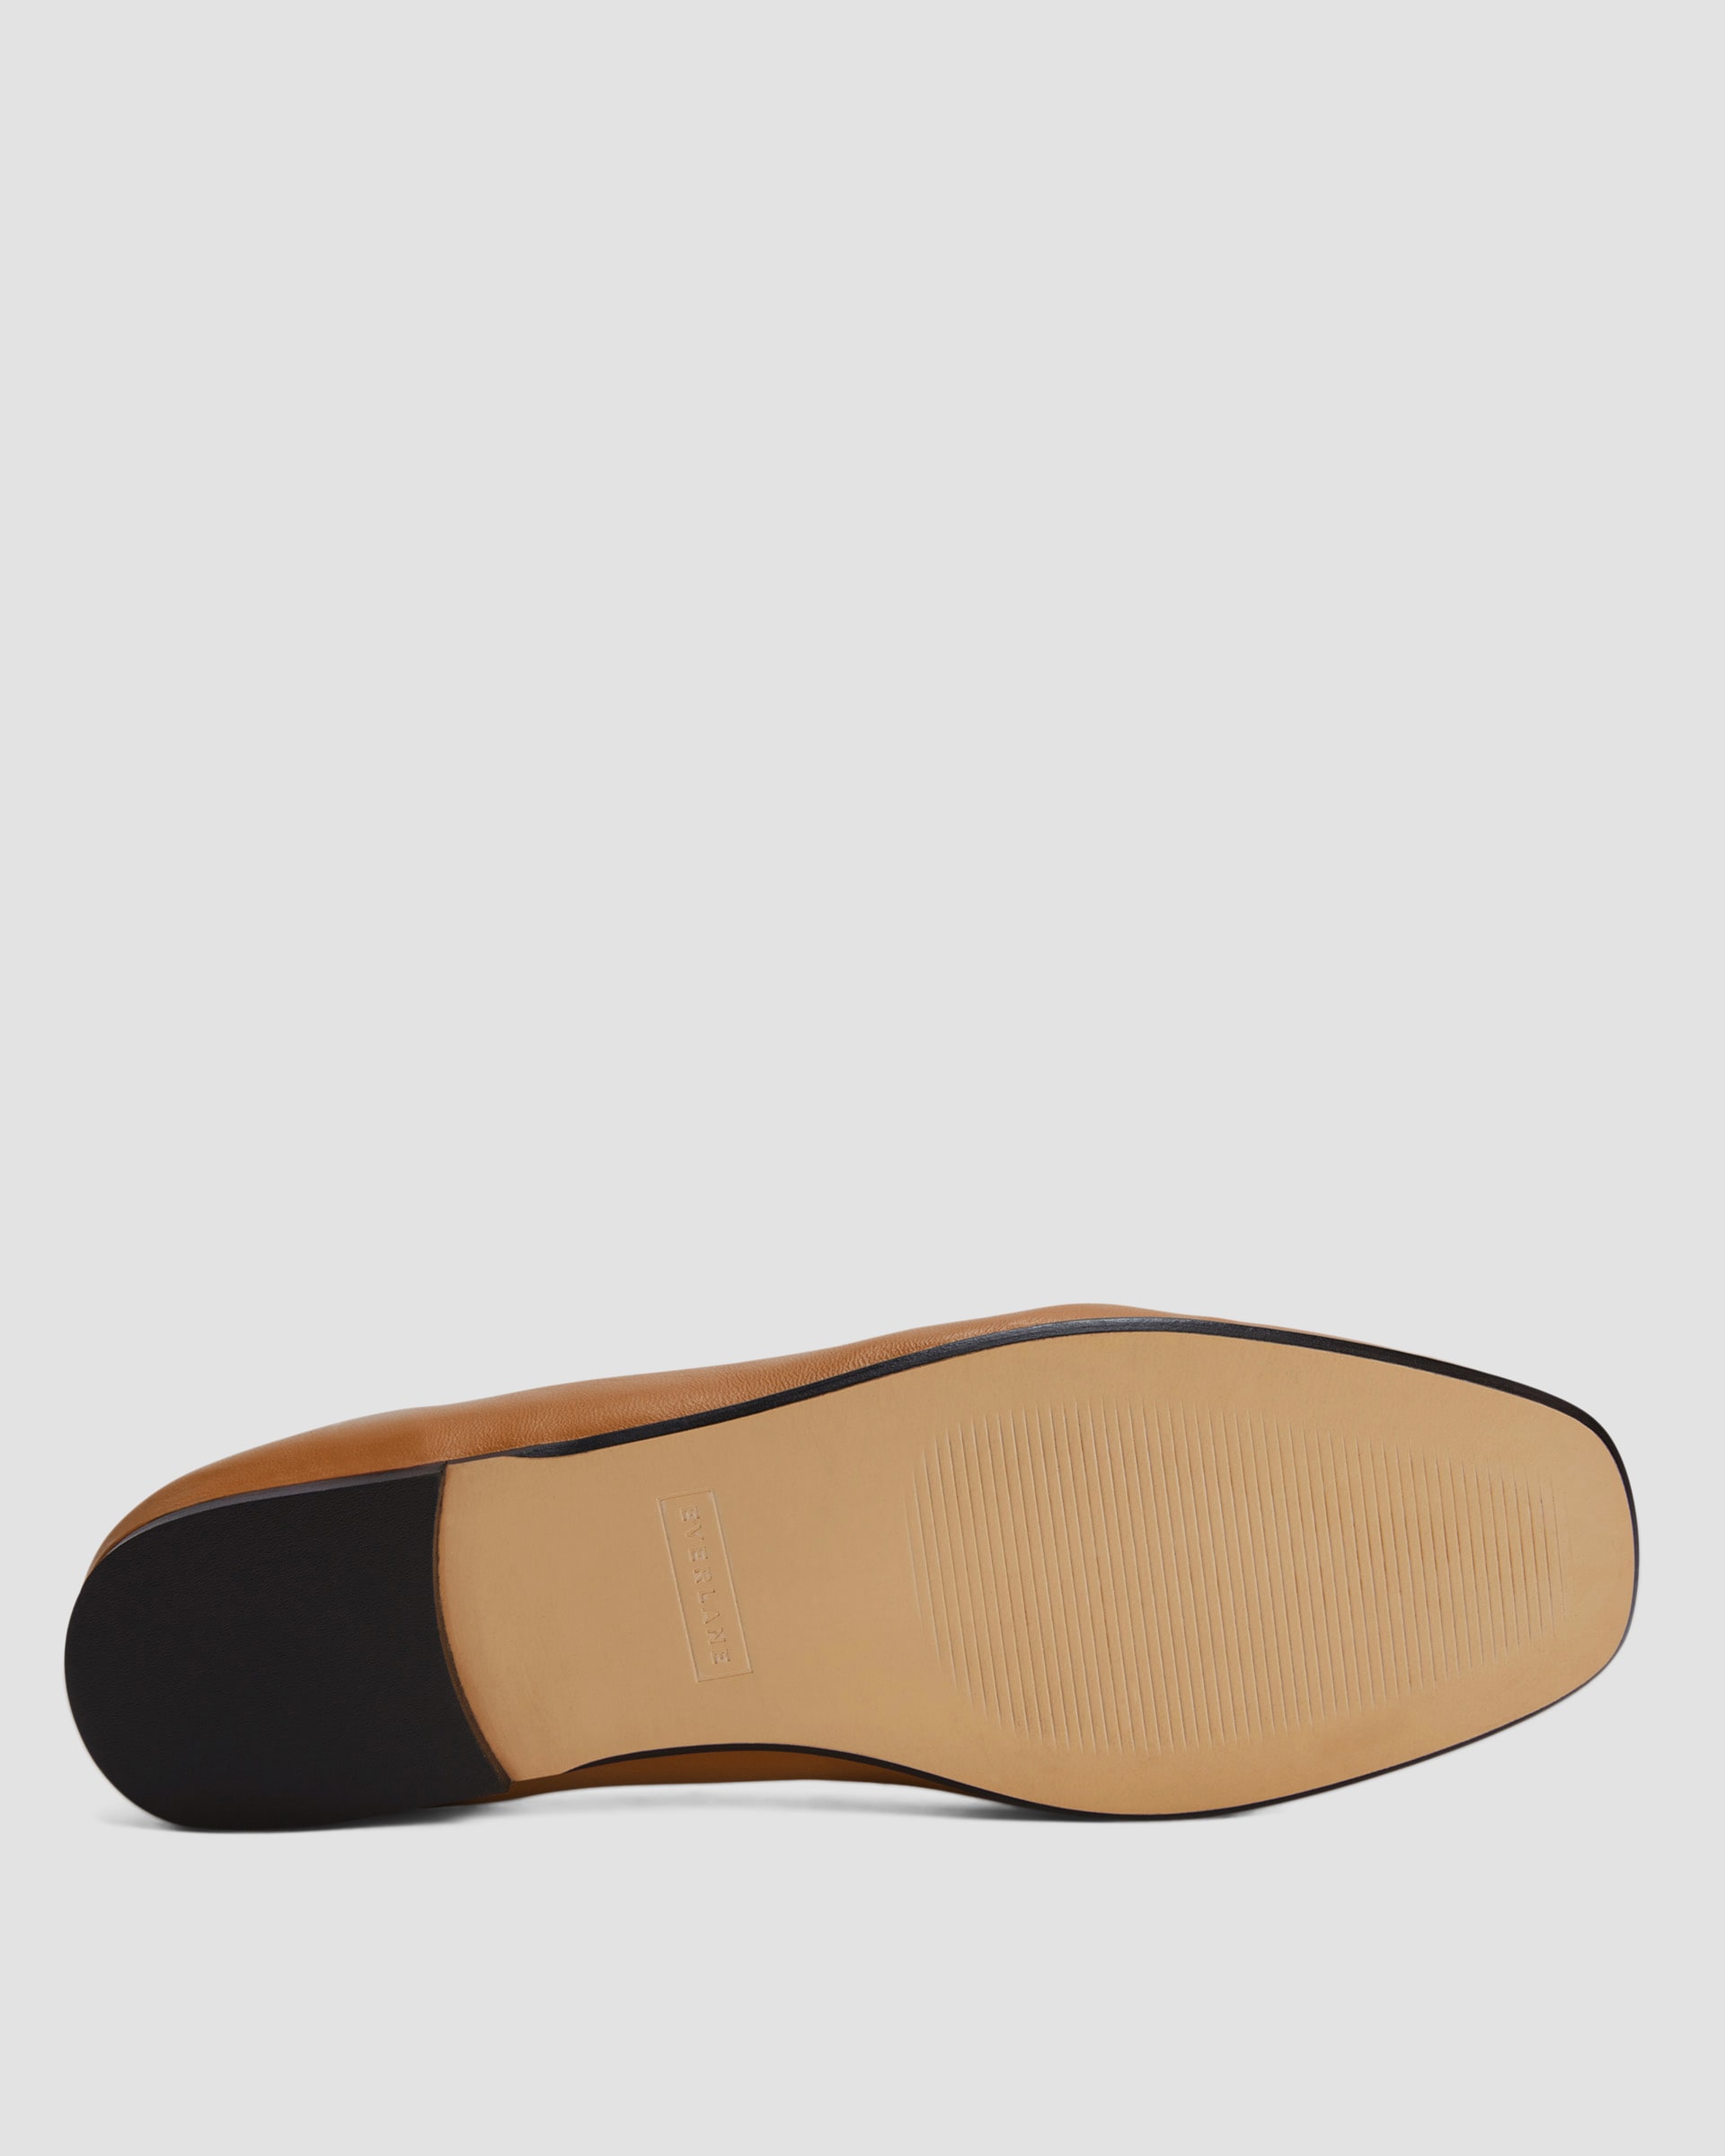 The Day Ballet Flat Toasted Almond / Tan Lining – Everlane